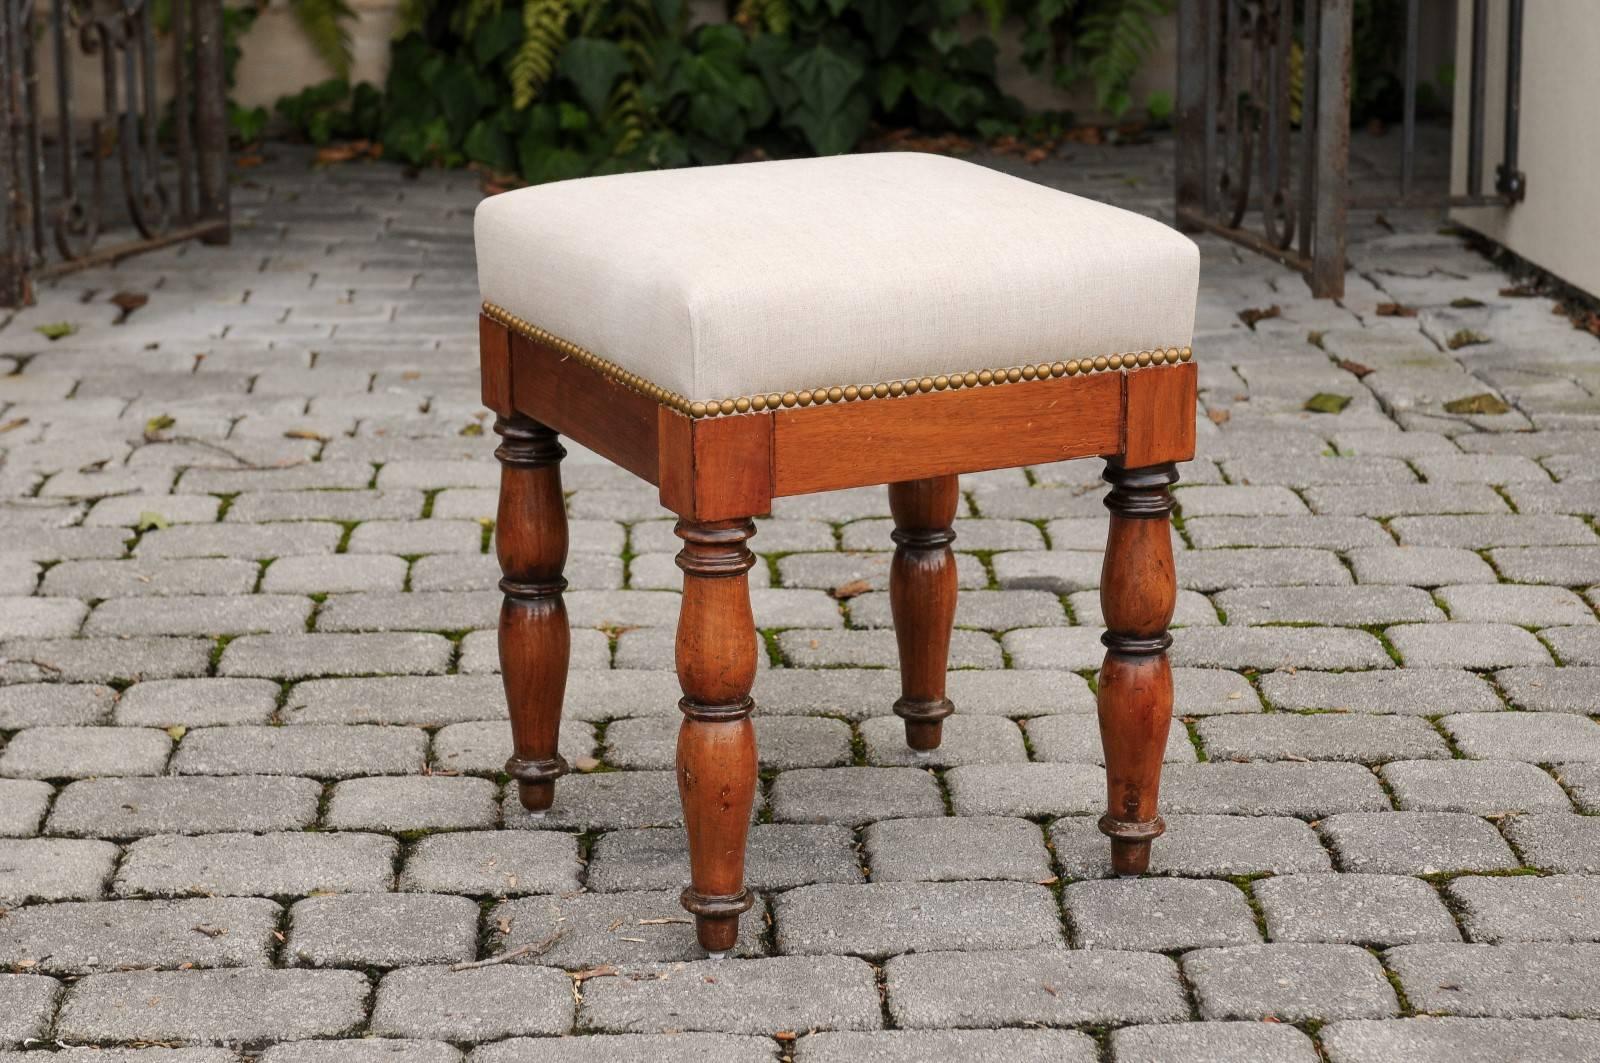 An English walnut stool with upholstered seat from the second half of the 19th century. This English wooden stool features a square seat covered in linen with brass nailhead trim. The simple skirt is raised on four turned legs, gracefully swollen in